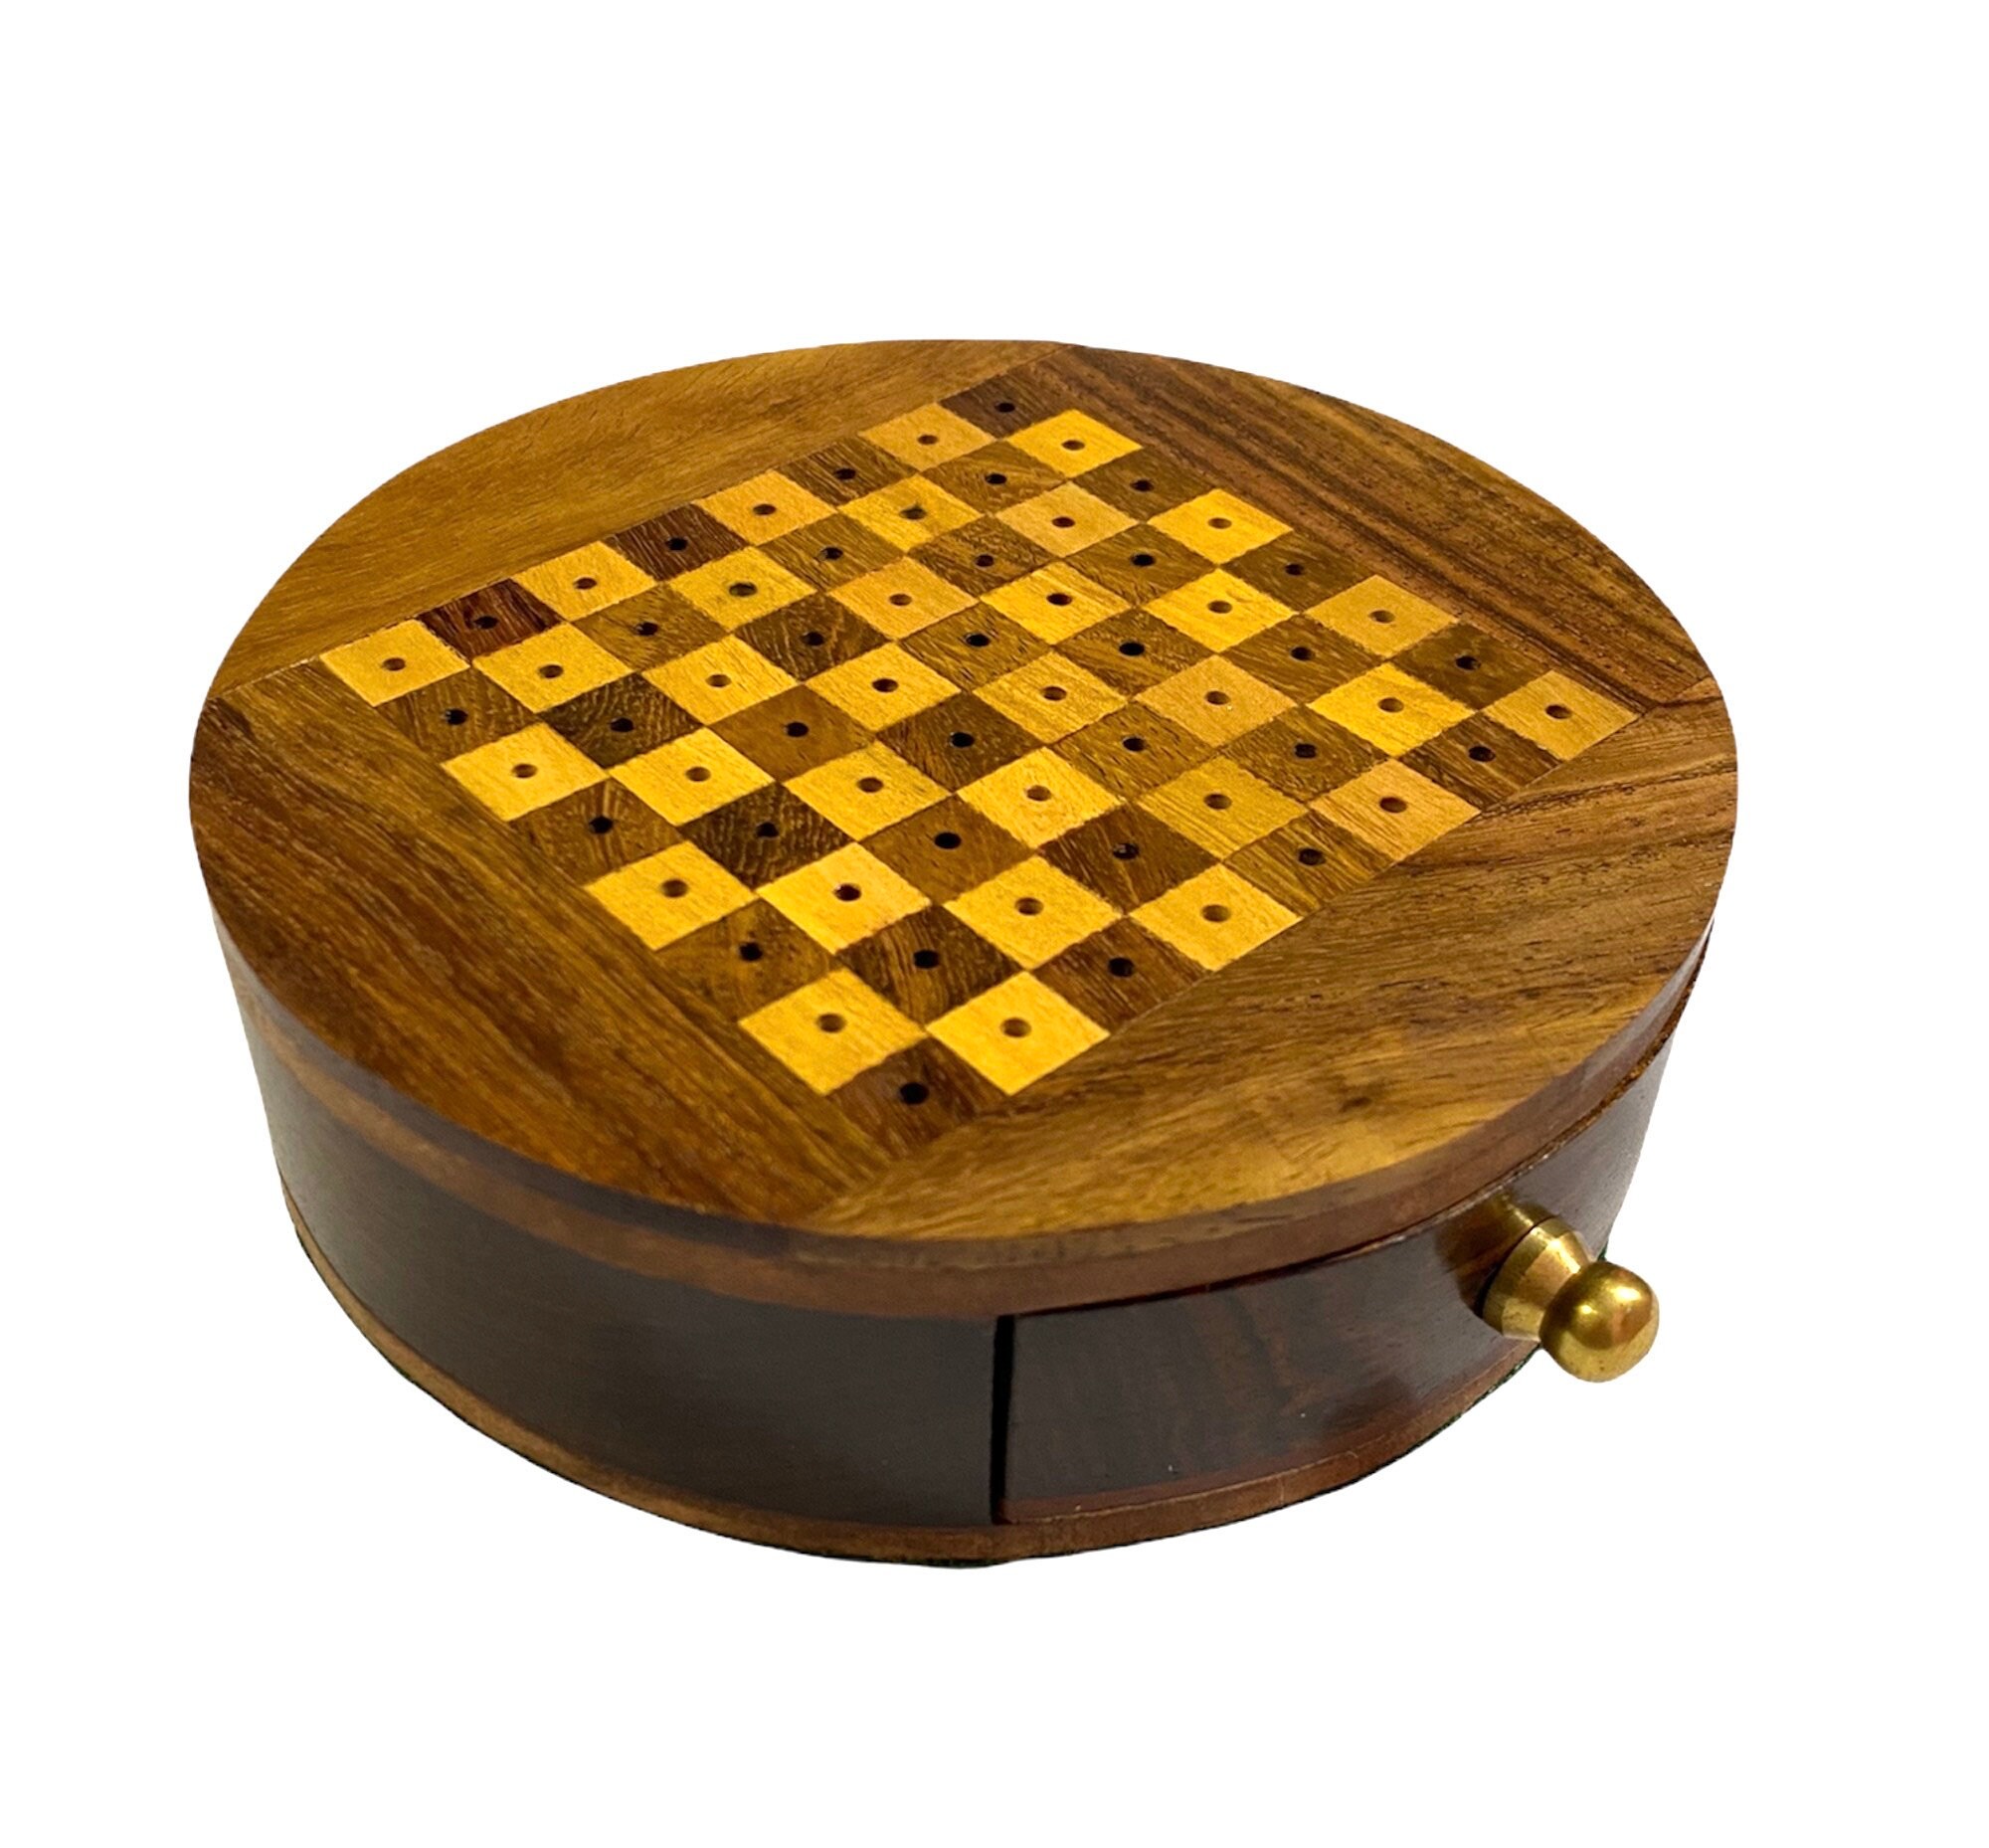 Compass and Chess Piece on Chess Board Game for Ideas, Challenge